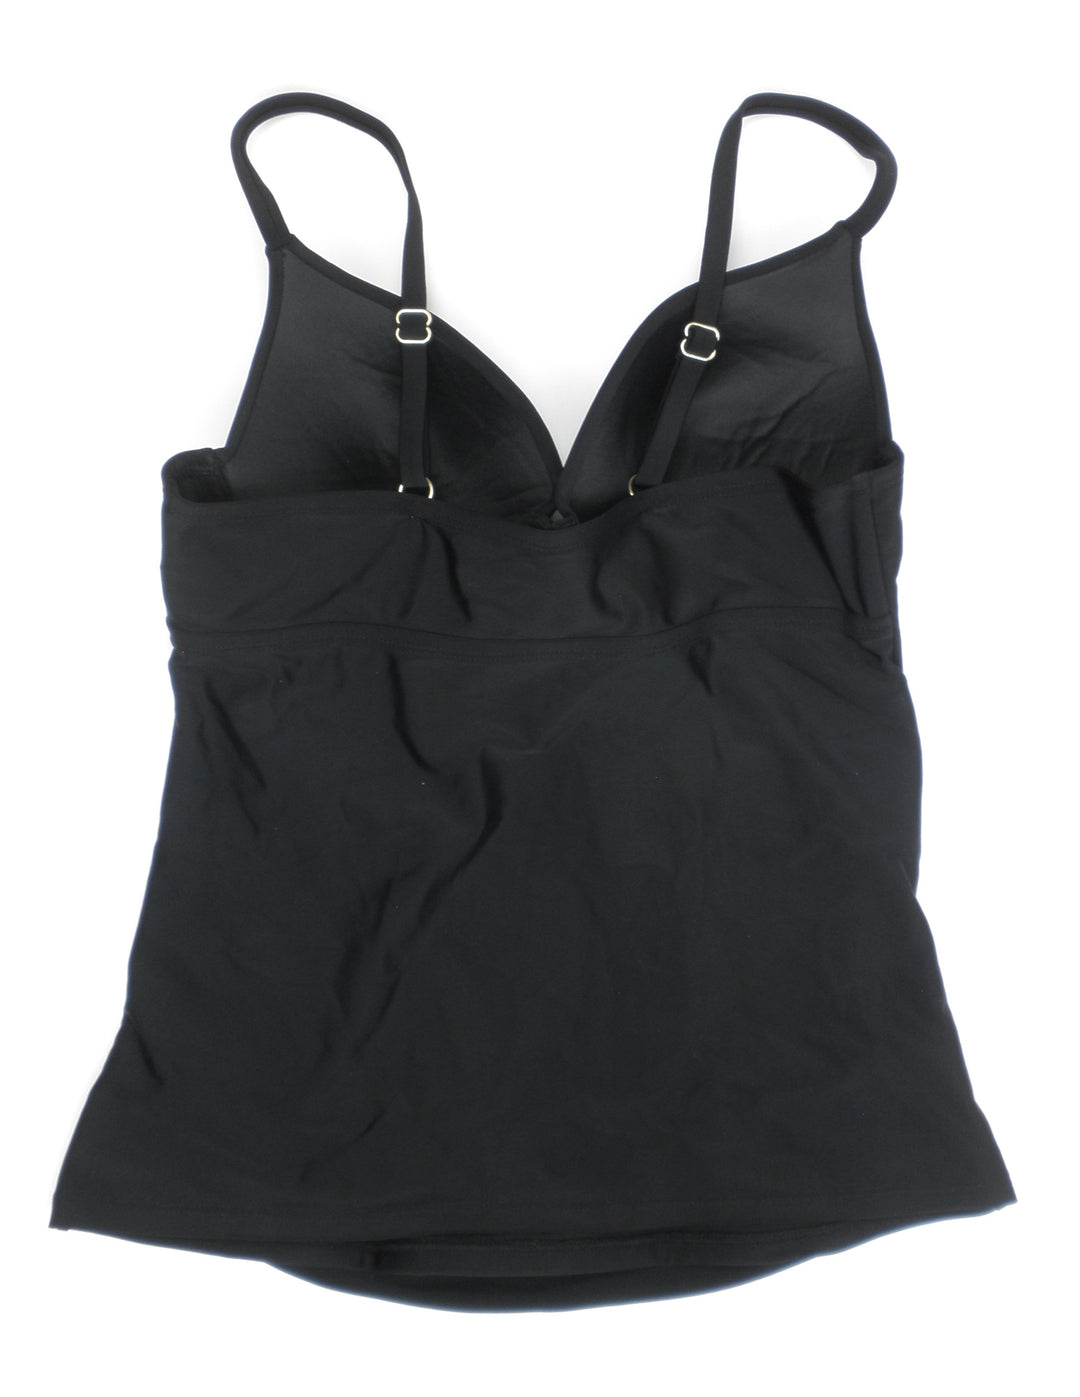 Merona Black Padded Bathing Suit Top - Small - The Fashion Foundation - {{ discount designer}}